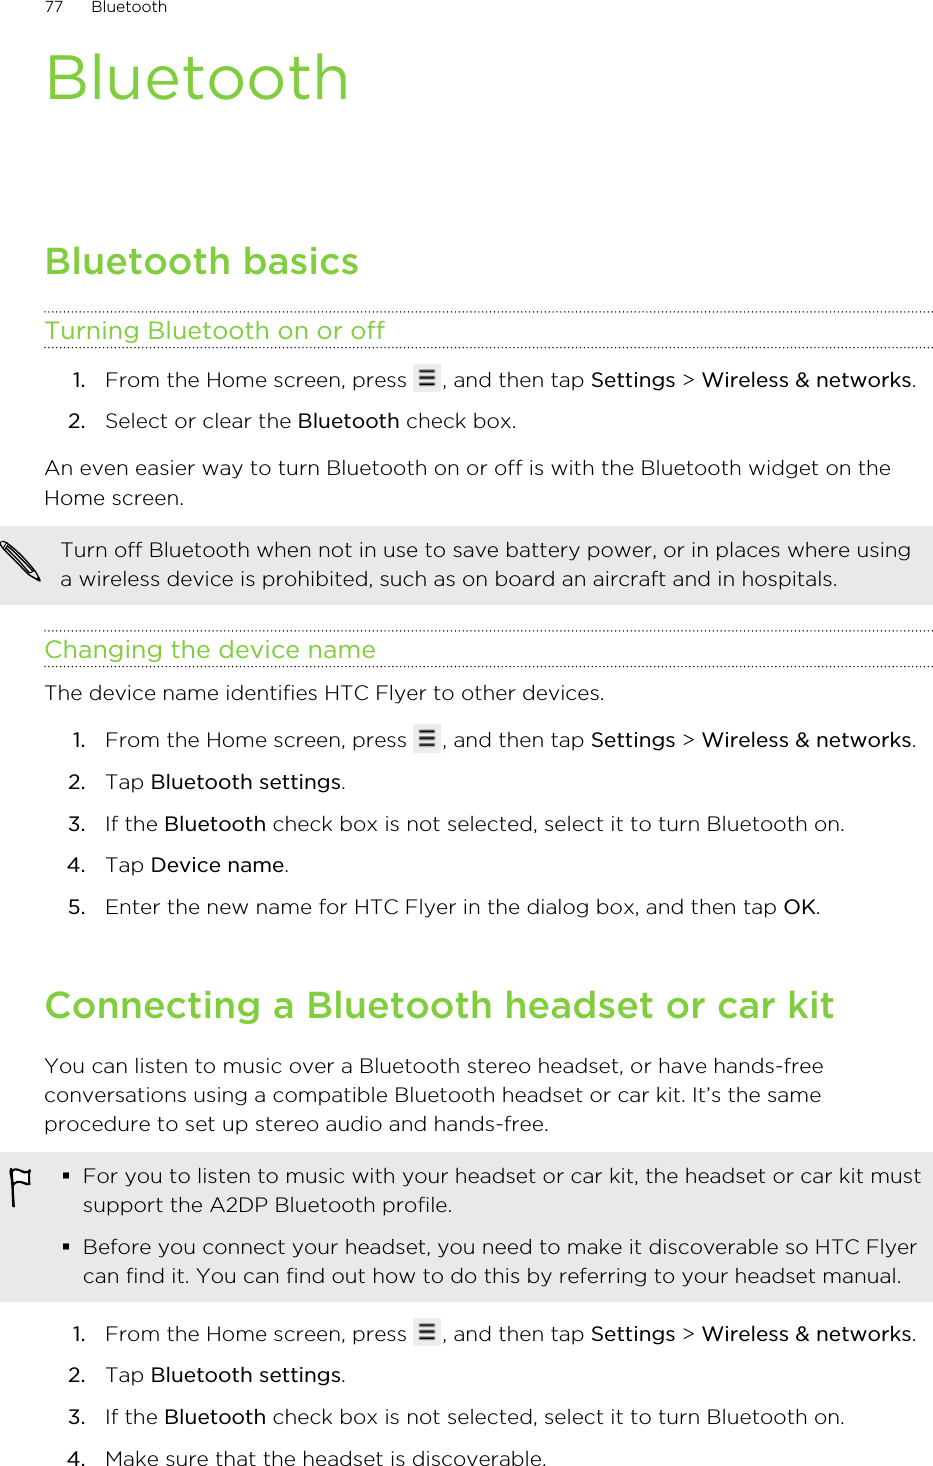 BluetoothBluetooth basicsTurning Bluetooth on or off1. From the Home screen, press  , and then tap Settings &gt; Wireless &amp; networks.2. Select or clear the Bluetooth check box.An even easier way to turn Bluetooth on or off is with the Bluetooth widget on theHome screen.Turn off Bluetooth when not in use to save battery power, or in places where usinga wireless device is prohibited, such as on board an aircraft and in hospitals.Changing the device nameThe device name identifies HTC Flyer to other devices.1. From the Home screen, press  , and then tap Settings &gt; Wireless &amp; networks.2. Tap Bluetooth settings.3. If the Bluetooth check box is not selected, select it to turn Bluetooth on.4. Tap Device name.5. Enter the new name for HTC Flyer in the dialog box, and then tap OK.Connecting a Bluetooth headset or car kitYou can listen to music over a Bluetooth stereo headset, or have hands-freeconversations using a compatible Bluetooth headset or car kit. It’s the sameprocedure to set up stereo audio and hands-free.§For you to listen to music with your headset or car kit, the headset or car kit mustsupport the A2DP Bluetooth profile.§Before you connect your headset, you need to make it discoverable so HTC Flyercan find it. You can find out how to do this by referring to your headset manual.1. From the Home screen, press  , and then tap Settings &gt; Wireless &amp; networks.2. Tap Bluetooth settings.3. If the Bluetooth check box is not selected, select it to turn Bluetooth on.4. Make sure that the headset is discoverable.77 Bluetooth